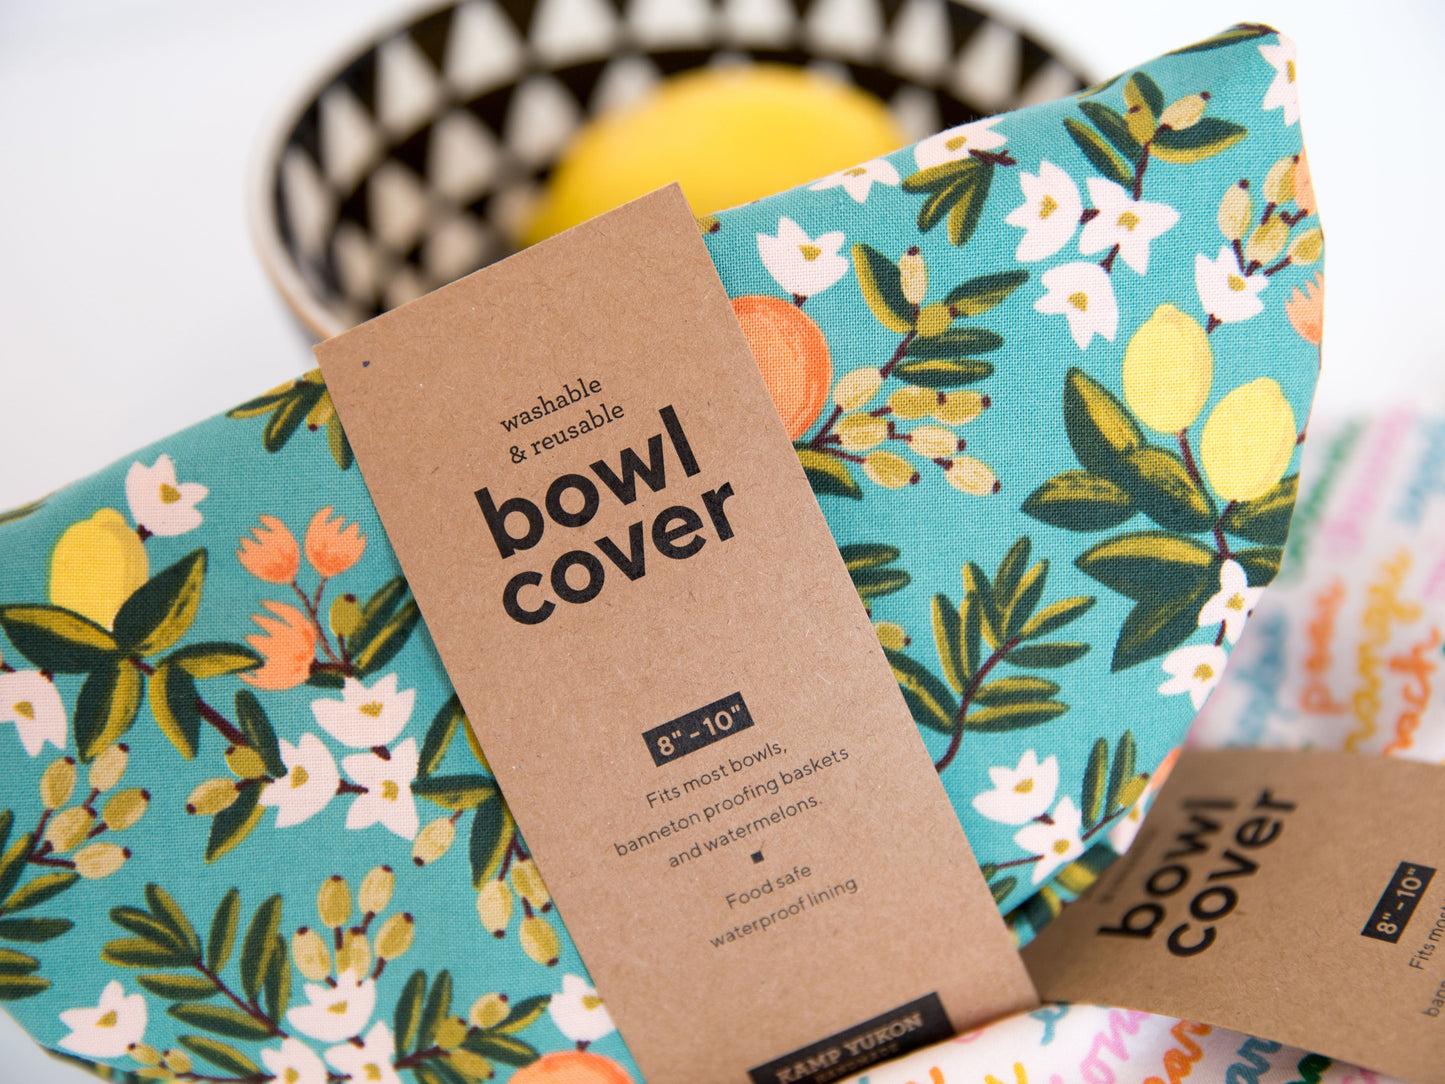 Bowl Cover - Floral Popsicles